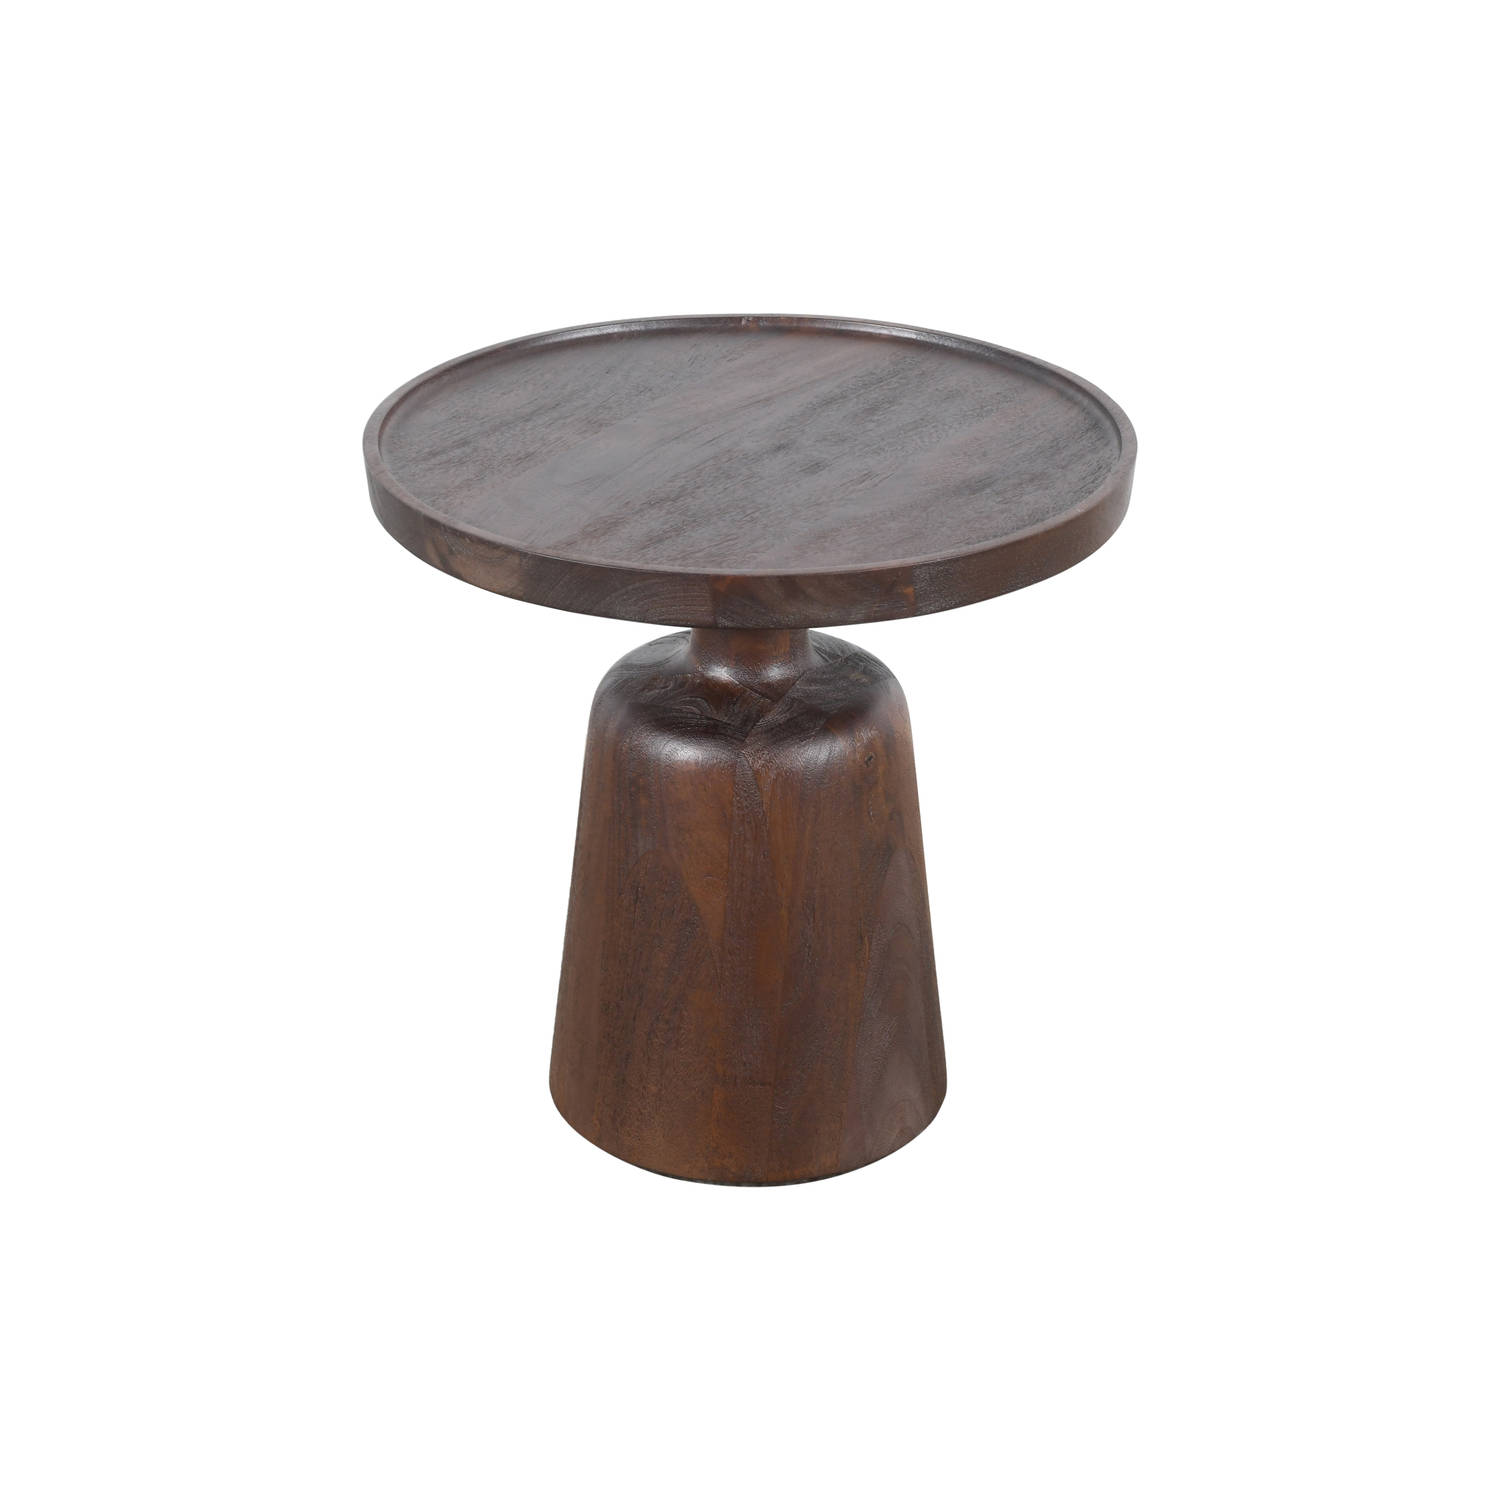 PTMD Veas brown side table